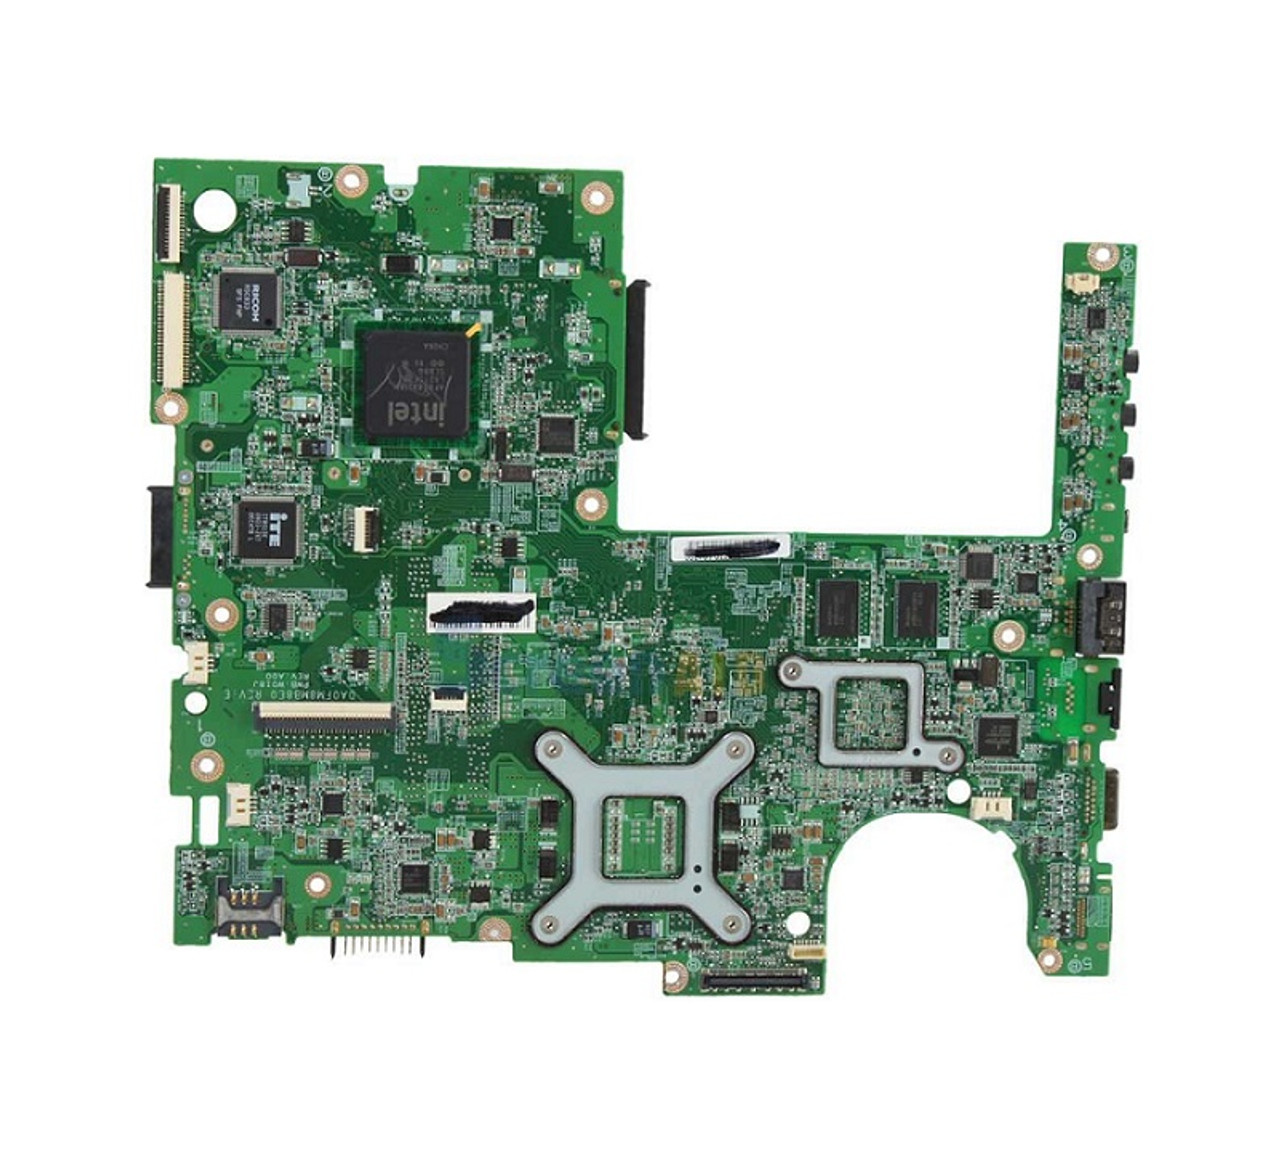 0P14T7 - Dell System Board (Motherboard) for Inspiron 15 5521 (Refurbished)